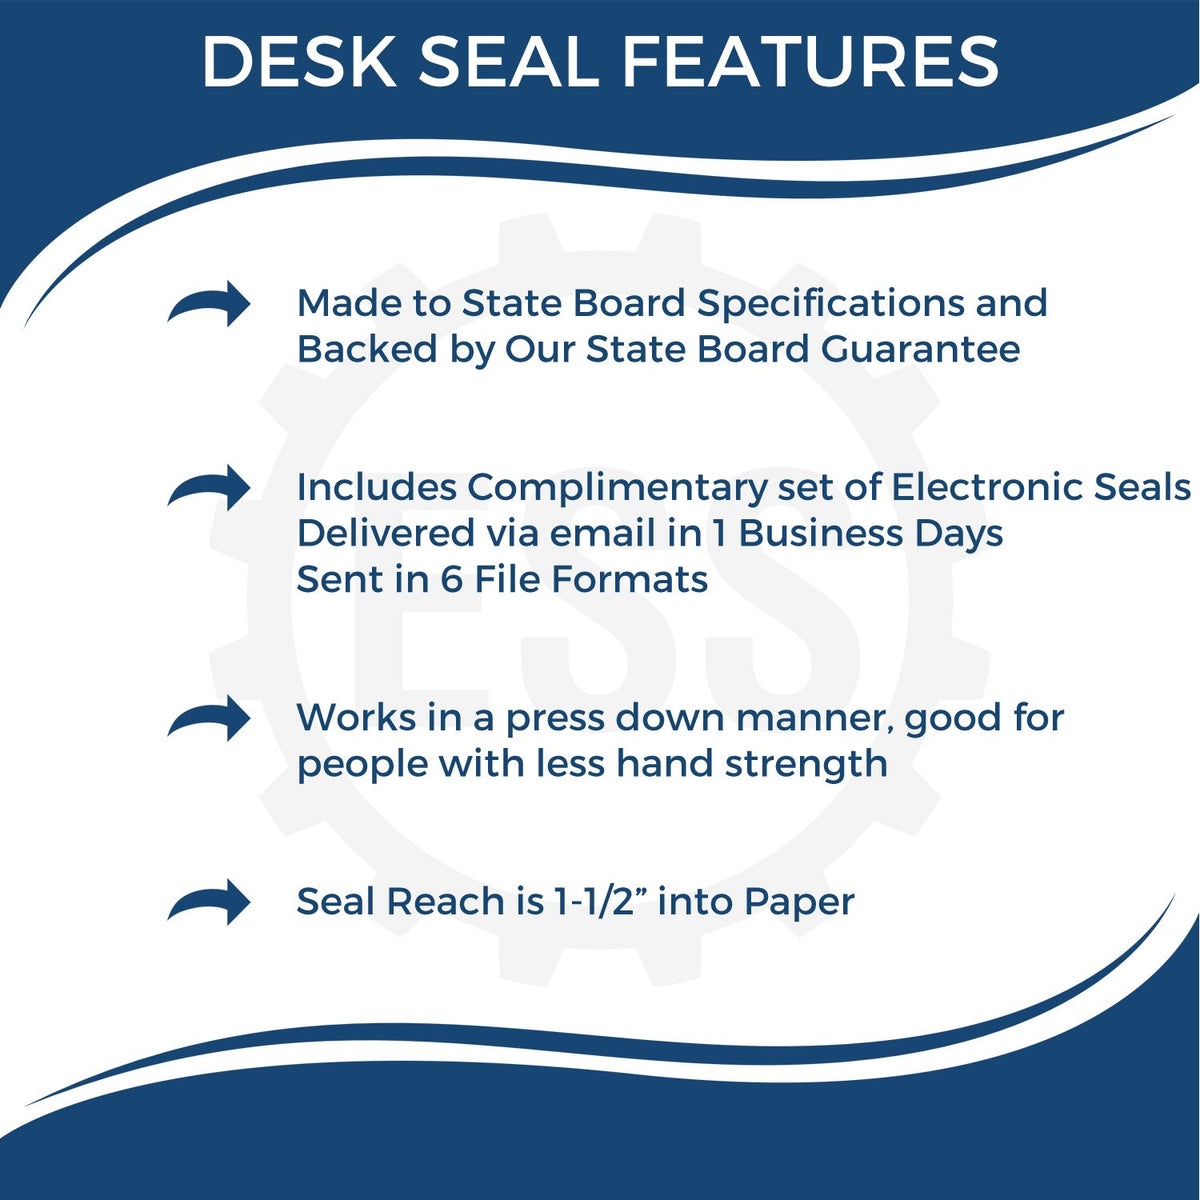 A picture of an infographic highlighting the selling points for the Arizona Desk Architect Embossing Seal